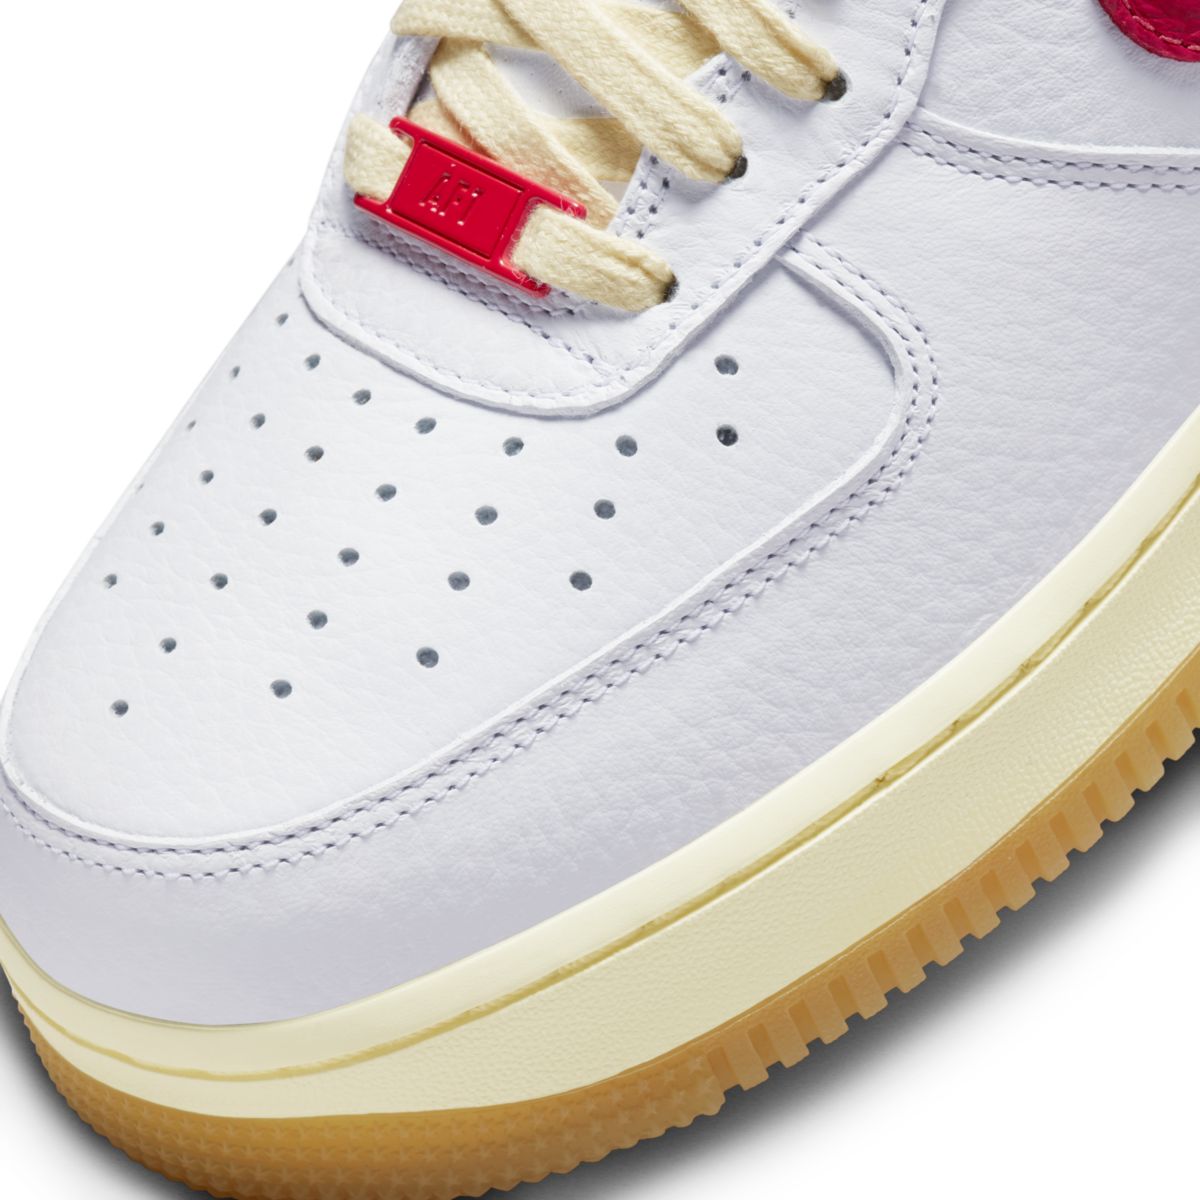 Nike Air Force 1 Low Summit White University Red FN3493-100 7